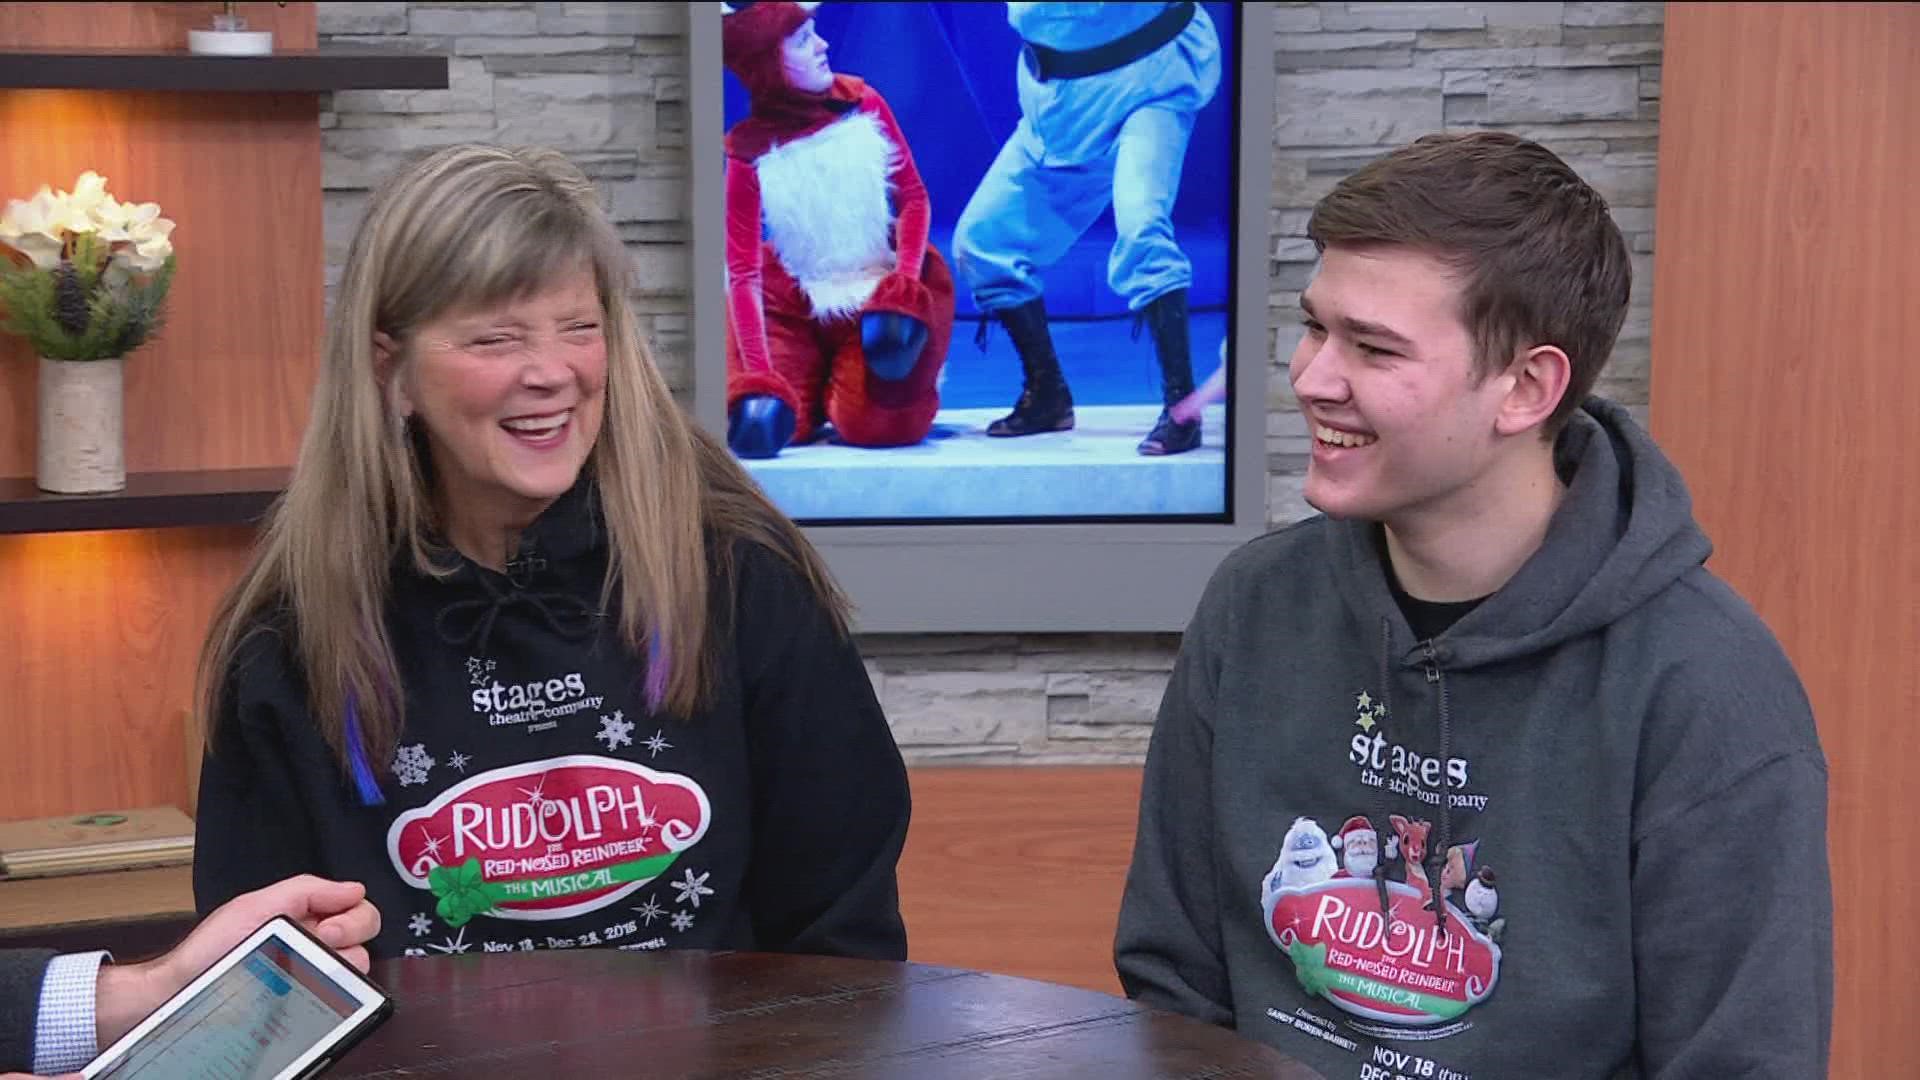 Athan Fischer plays Rudolph and Sandy Boren Barrett is the director of Rudolph the Red-Nosed Reindeer: The Musical. They joined KARE 11 Saturday to discuss the show.